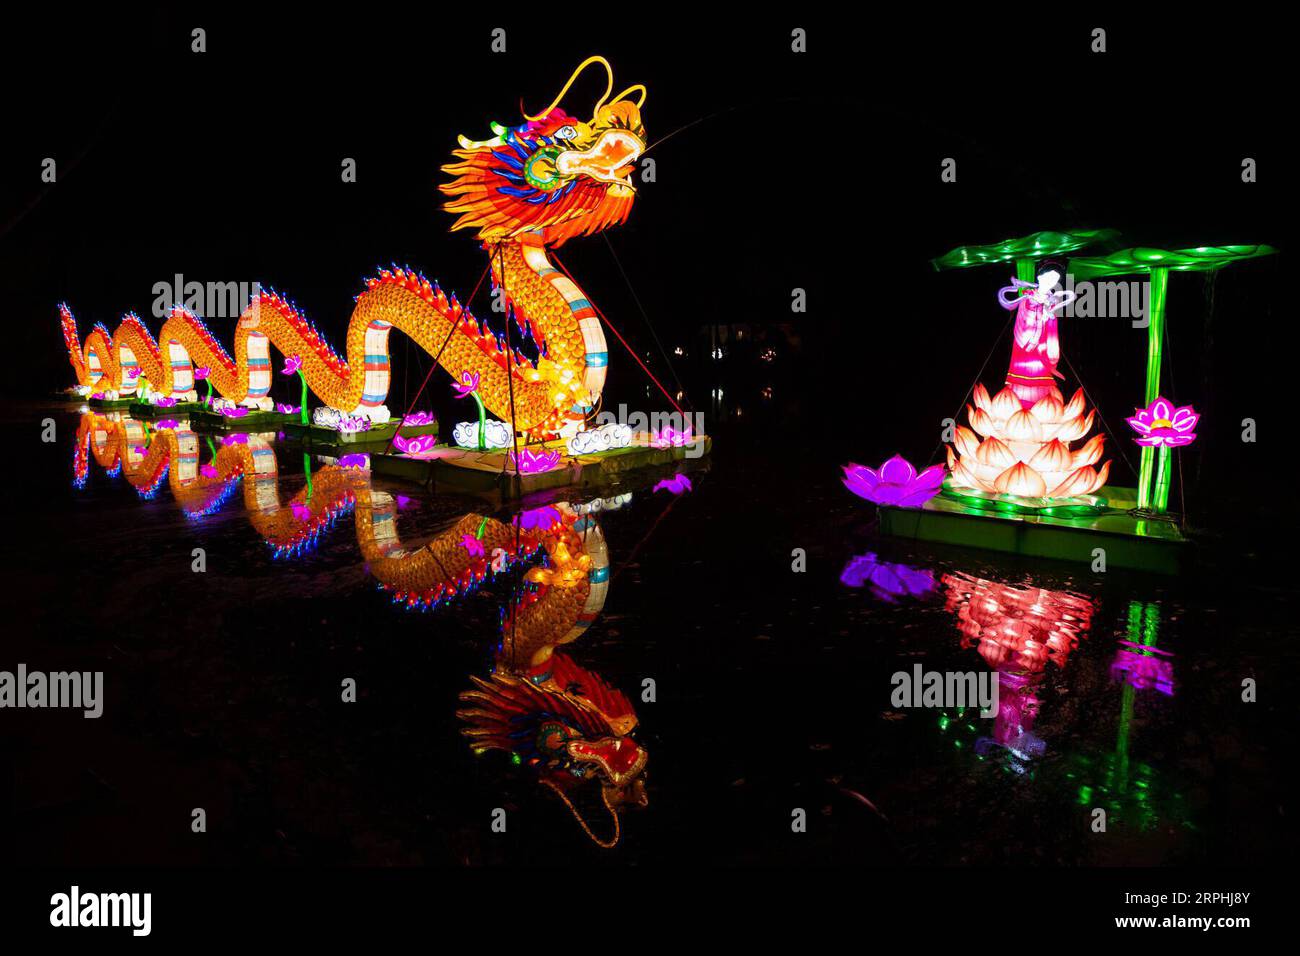 191110 -- LOS ANGELES, Nov. 10, 2019 -- Light installations are displayed during the Moonlight Forest Magical Lantern Art Festival at the Los Angeles County Arboretum and Botanic Garden in Los Angeles, the United States, Nov. 9, 2019. Photo by /Xinhua U.S.-LOS ANGELES-LANTERN ART FESTIVAL QianxWeizhong PUBLICATIONxNOTxINxCHN Stock Photo